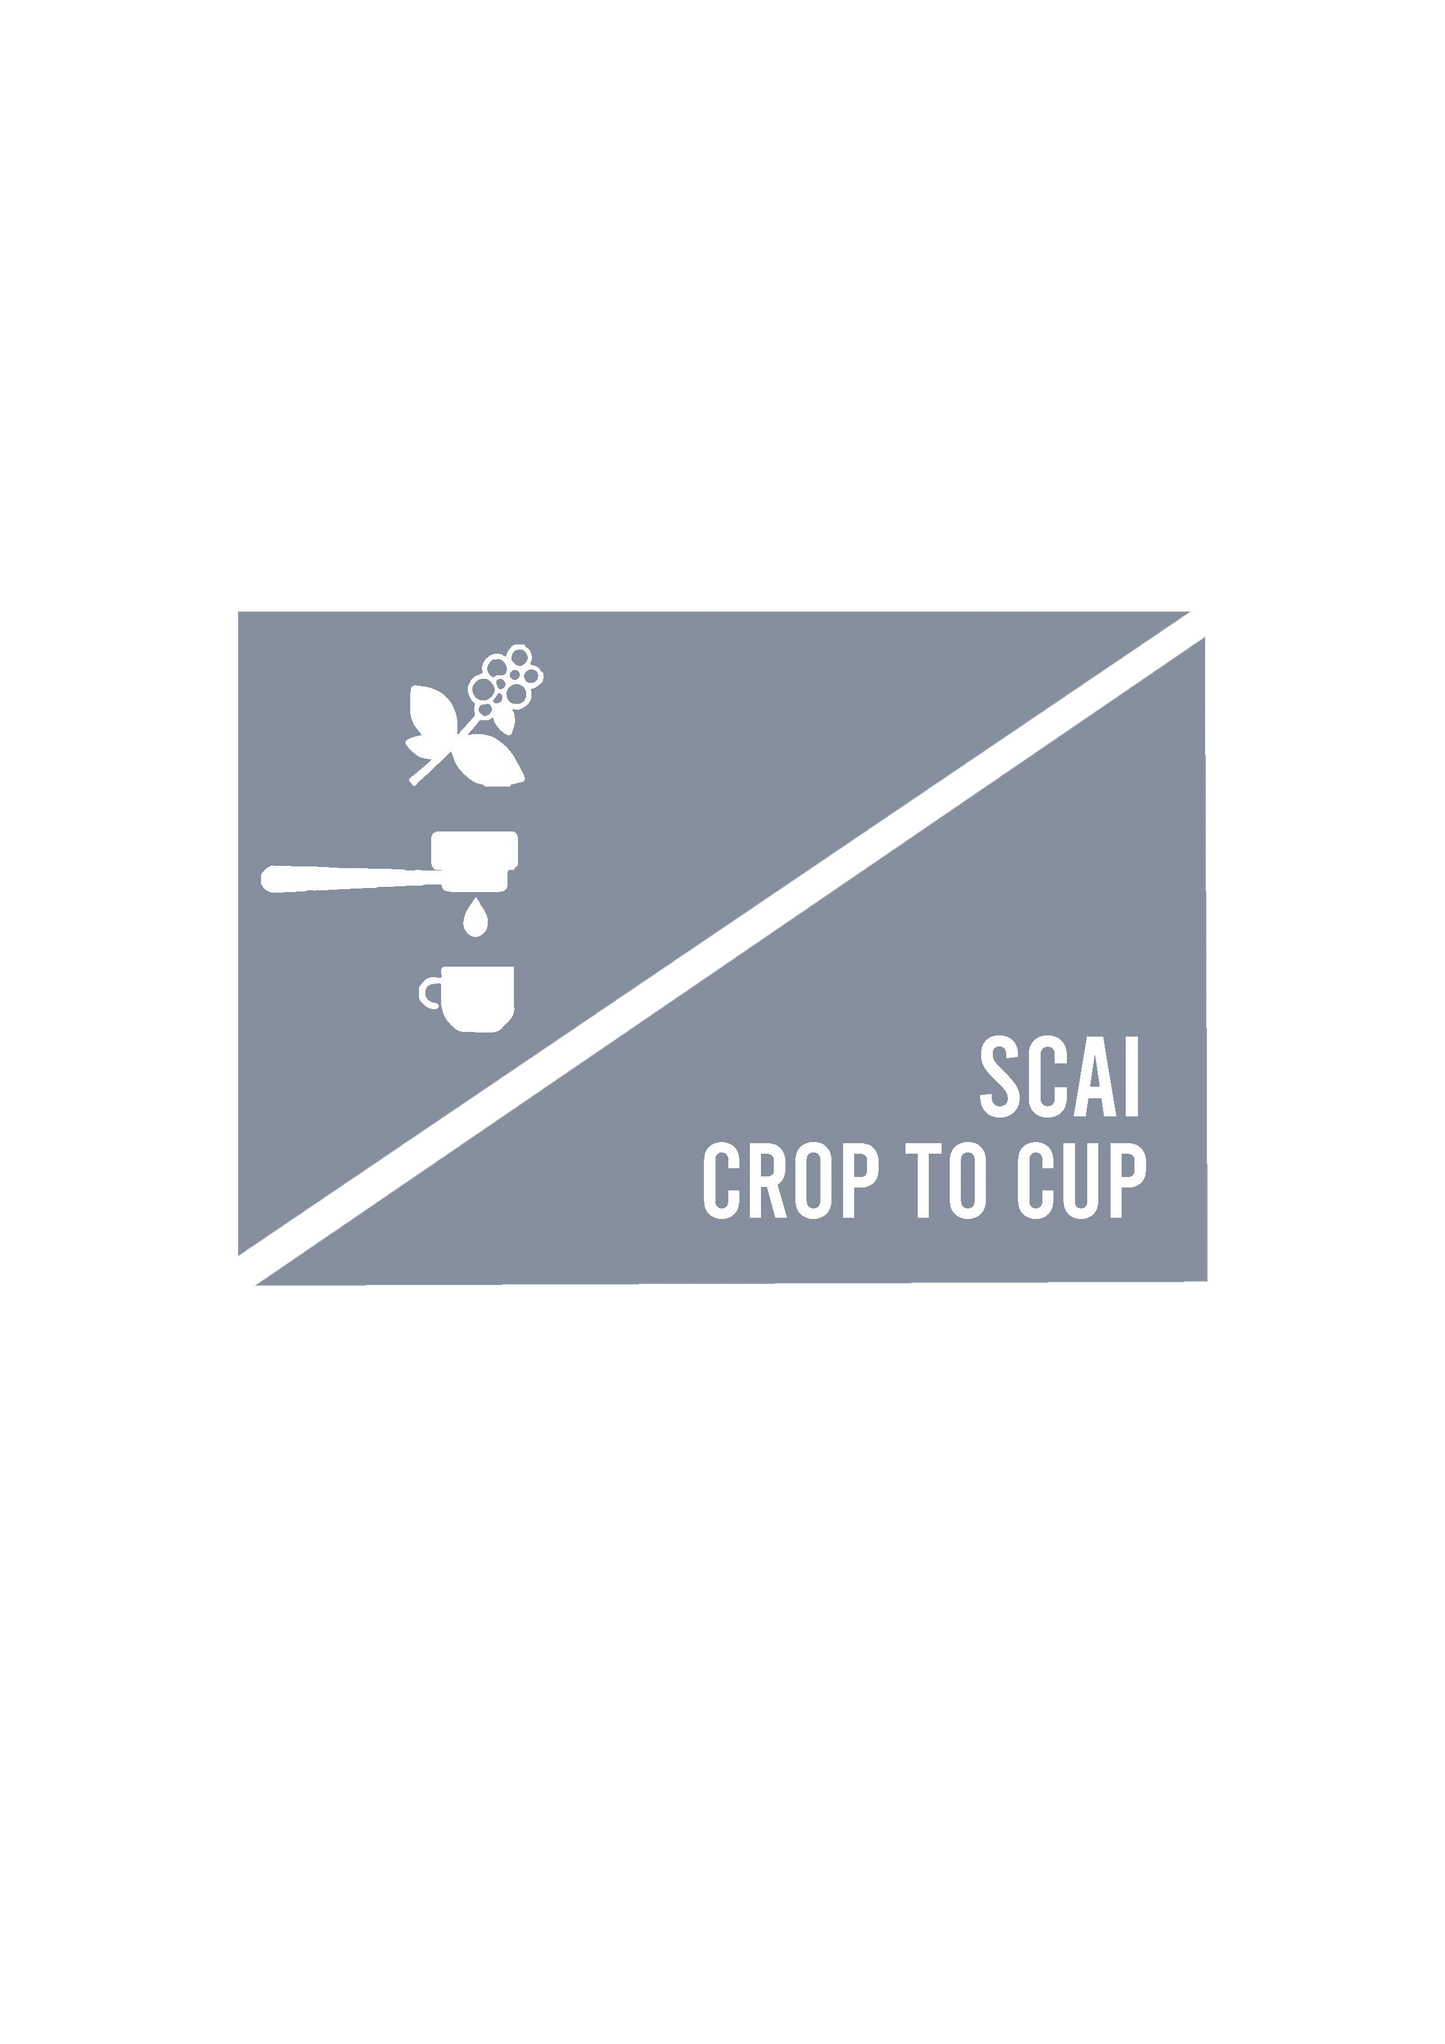 SCAI crop to cup workshop detailing out journey of coffee from plantation to a beverage cup